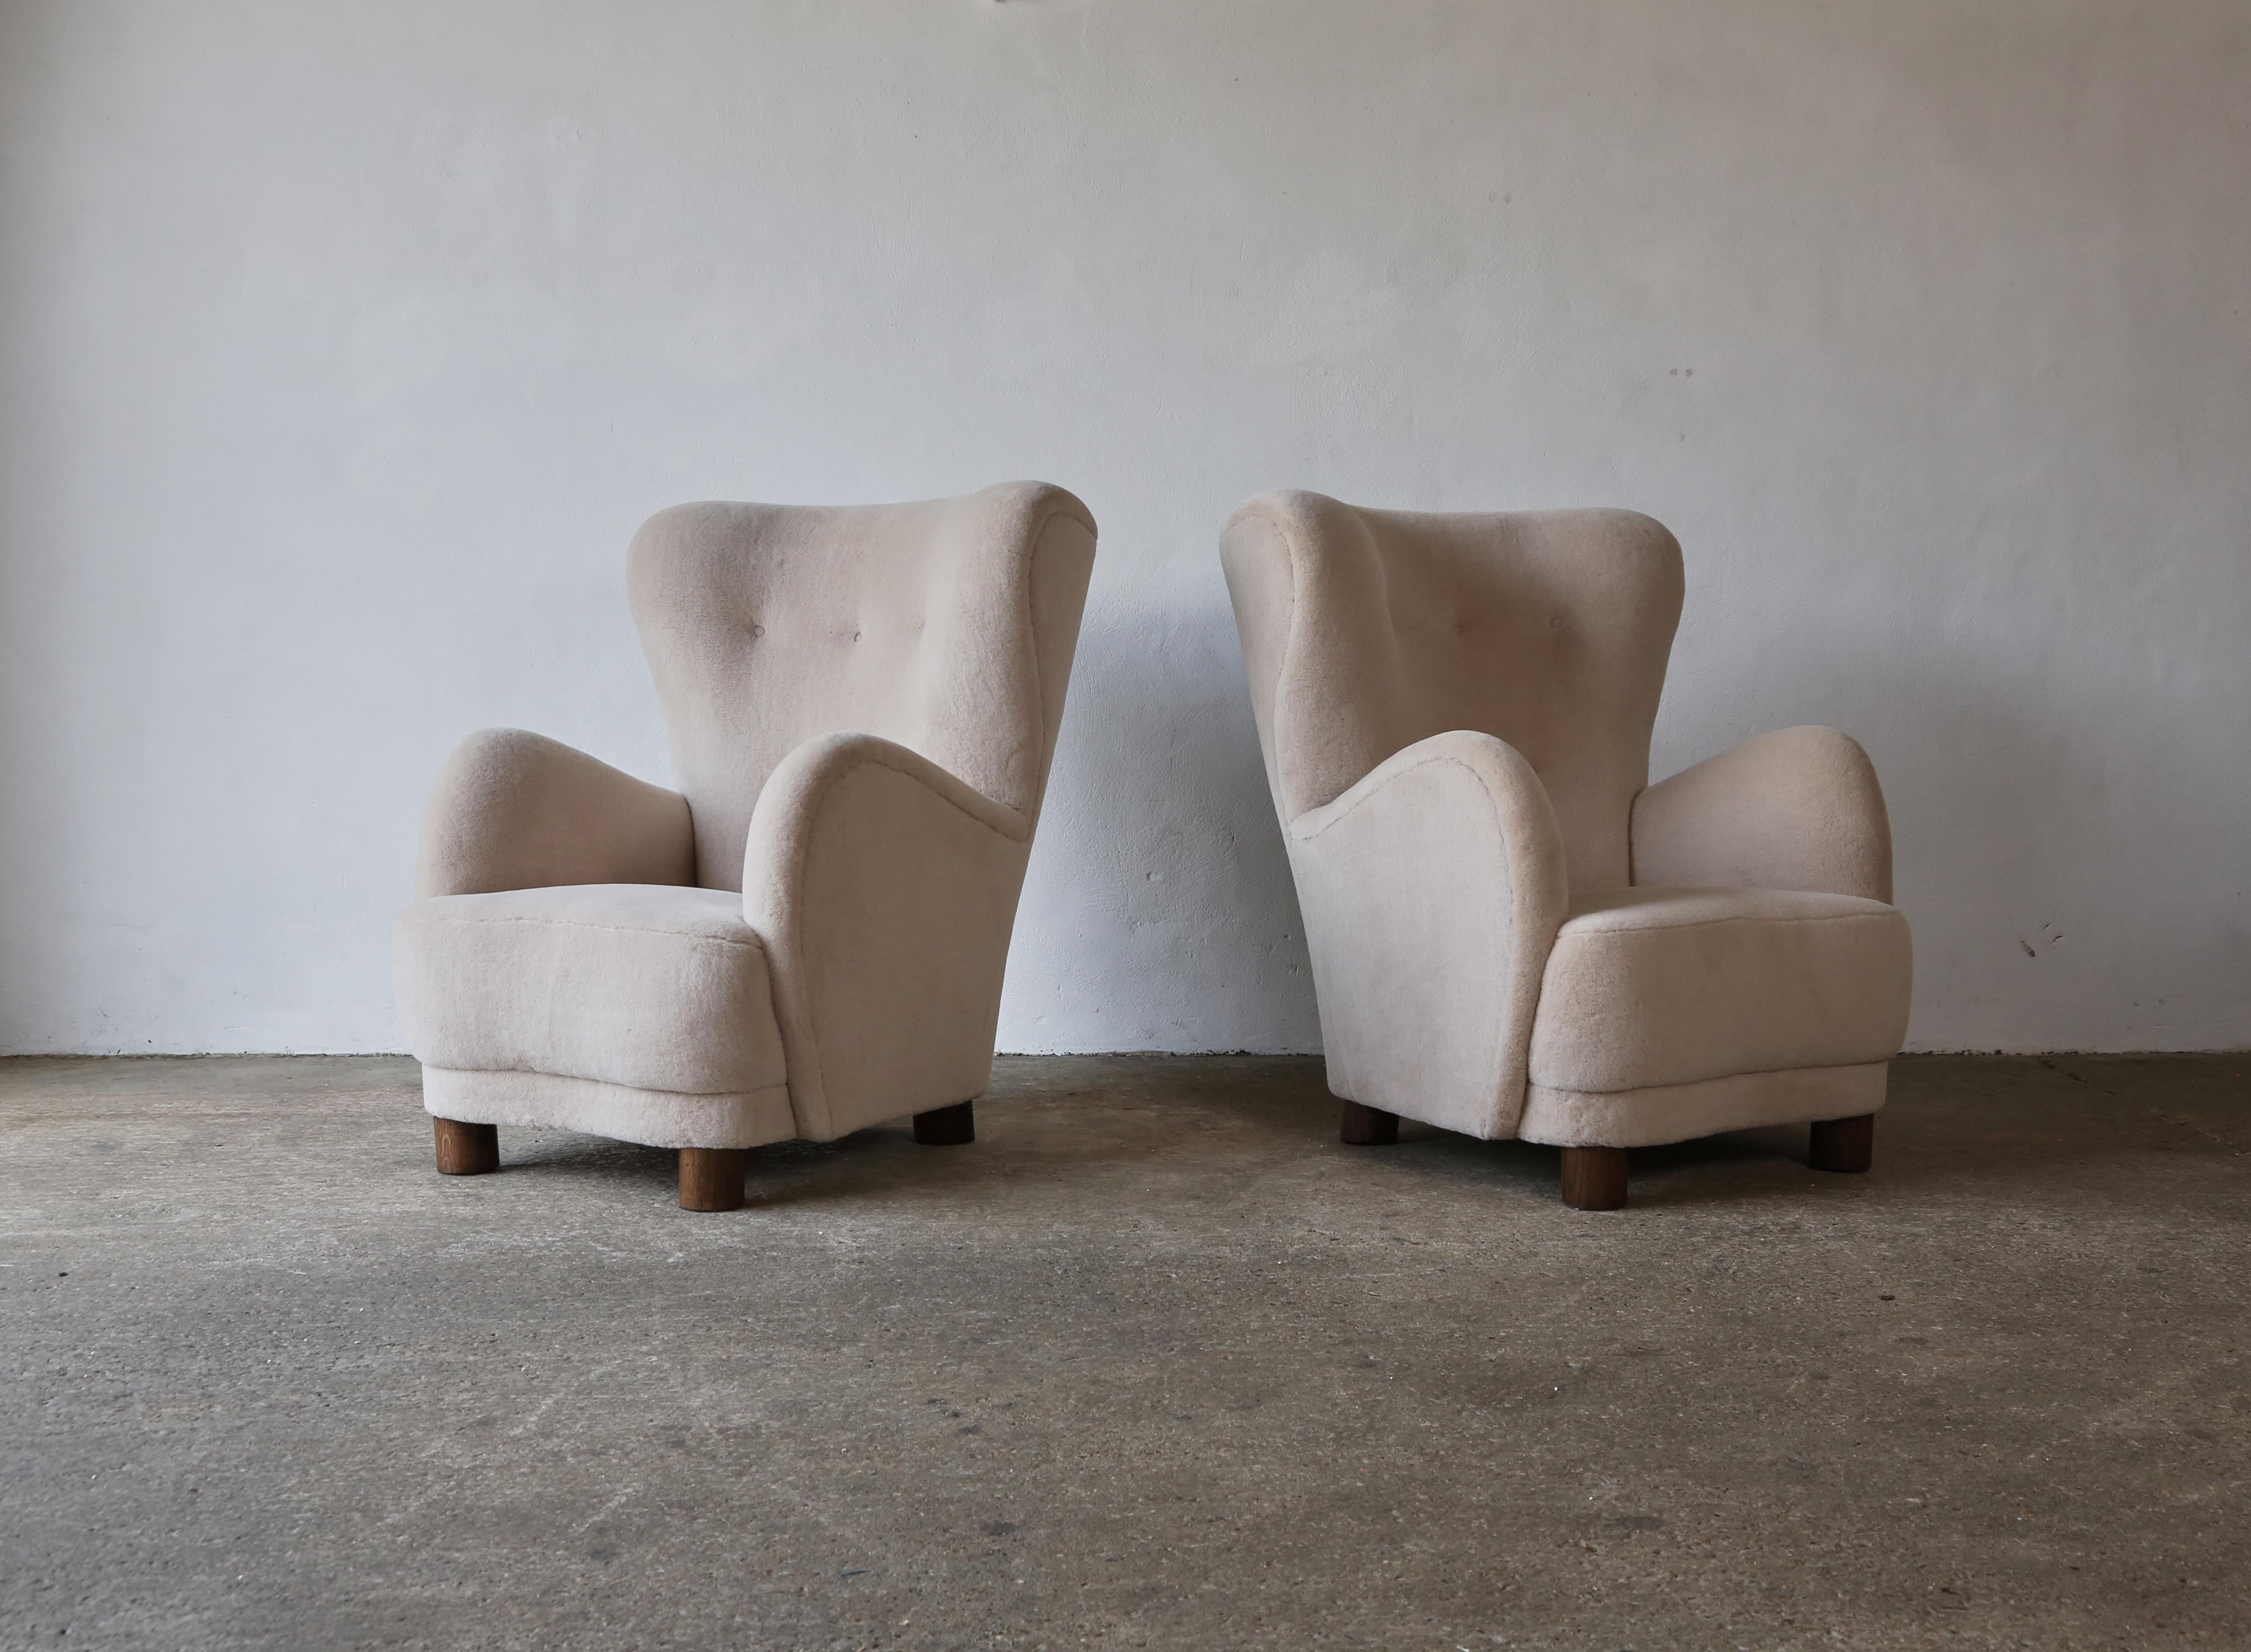 A super pair of modern 1940s style high backed armchairs.  Handmade beech frames, sprung seat and solid oak feet.   Newly upholstered in a luxurious, soft, pure alpaca wool fabric.  Priced and sold as a pair together.    Fast shipping worldwide.

